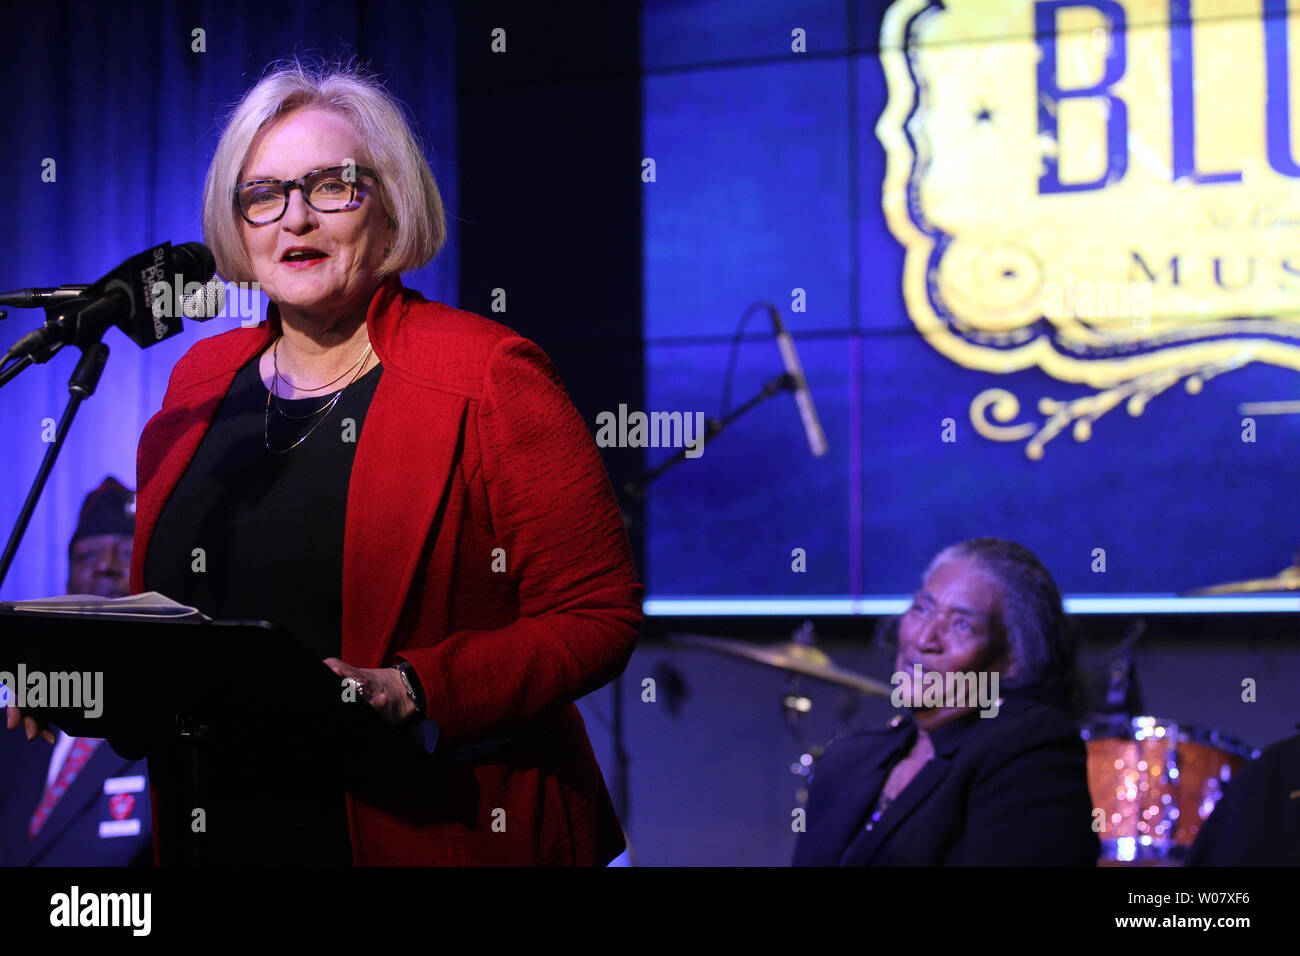 Frances Johnson, widow of the late jazz and blues pianist Johnnie Johnson, listens as U.S. Senator Claire McCaskill makes her remarks before awarding Johnson the Congressional Gold Medal, at the National Blues Museum in St. Louis on November 28, 2016. Johnson, who lived in St. Louis, was a Montford Point Marine, the African-American Marines unit who endured racism and inspired social change while integrating the previously all-white Marine Corps during World War II. After his service, Johnson had a long musical career culminating with an induction into the Rock and Roll Hall of Fame. Photo by Stock Photo